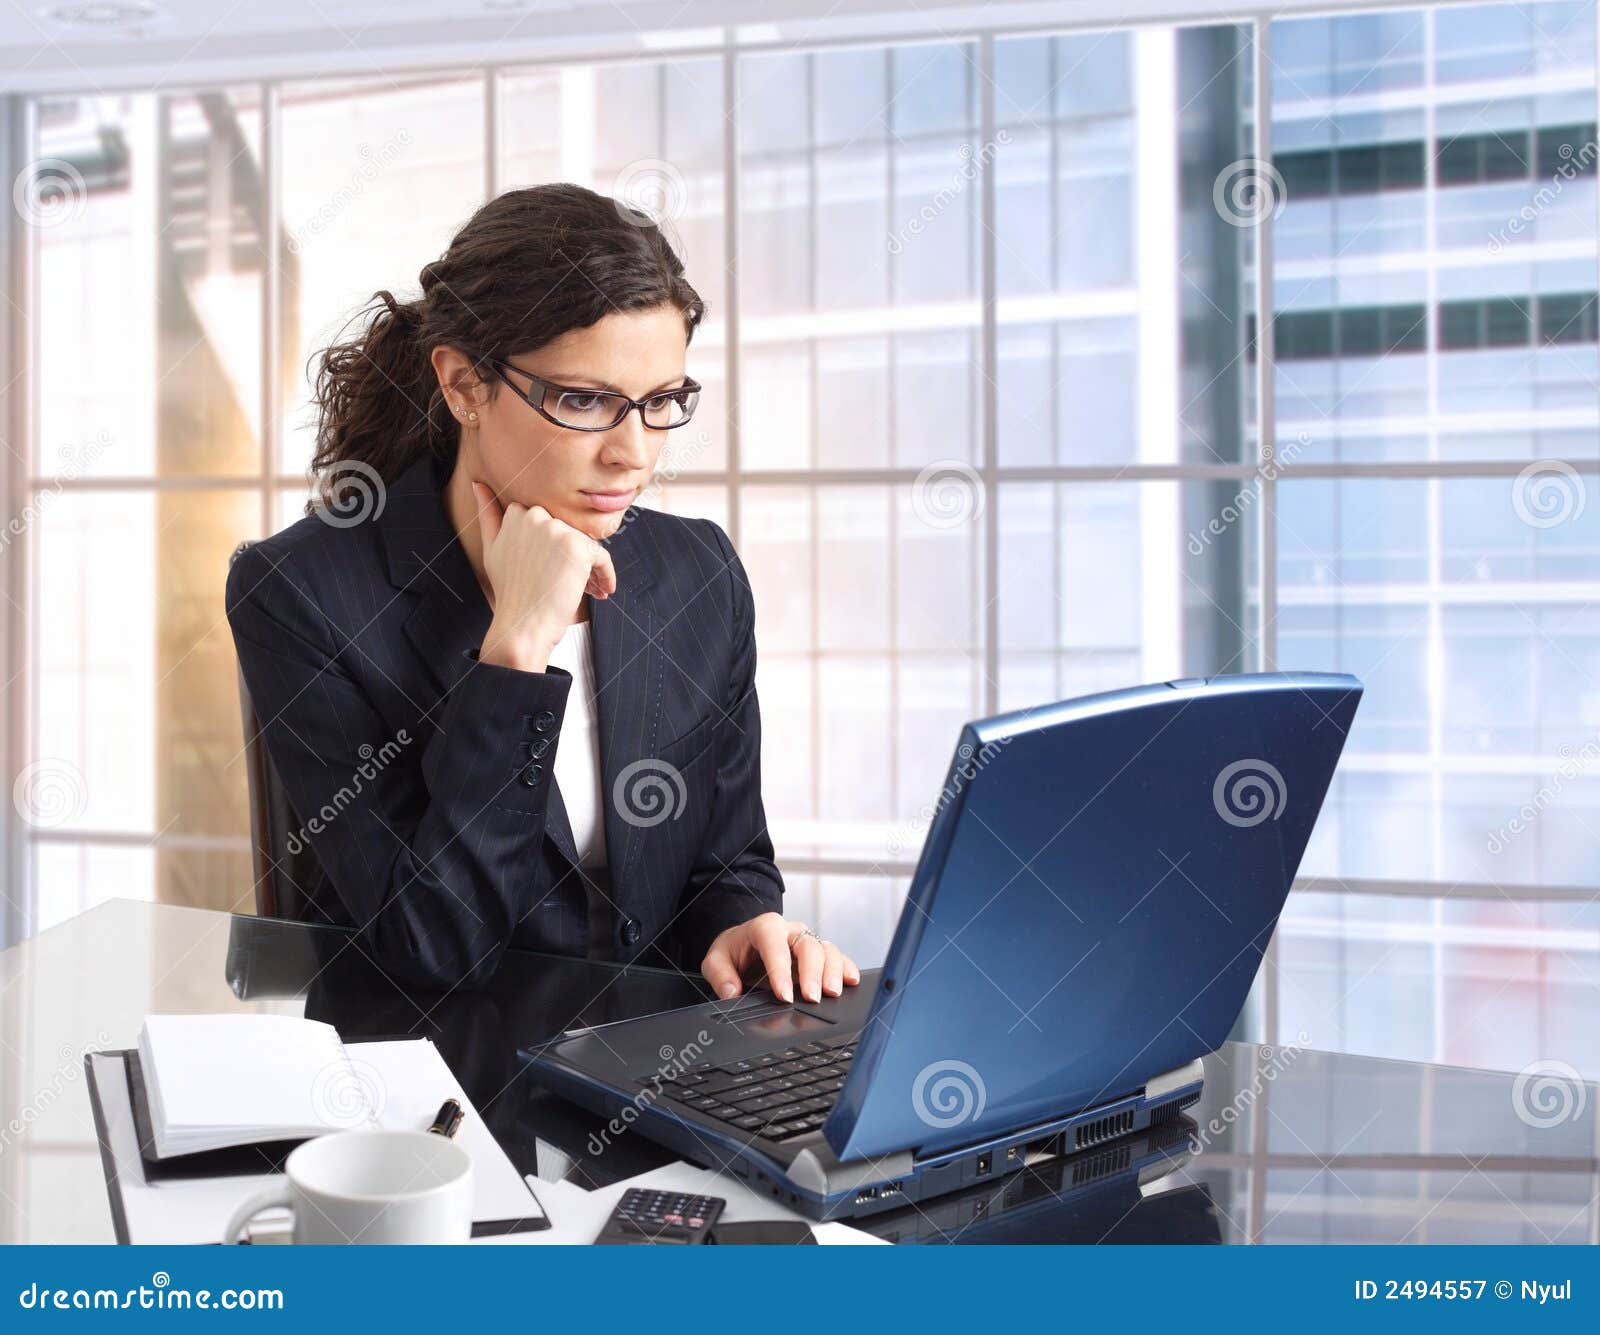 Female Office worker stock image. Image of formal, office - 2494557